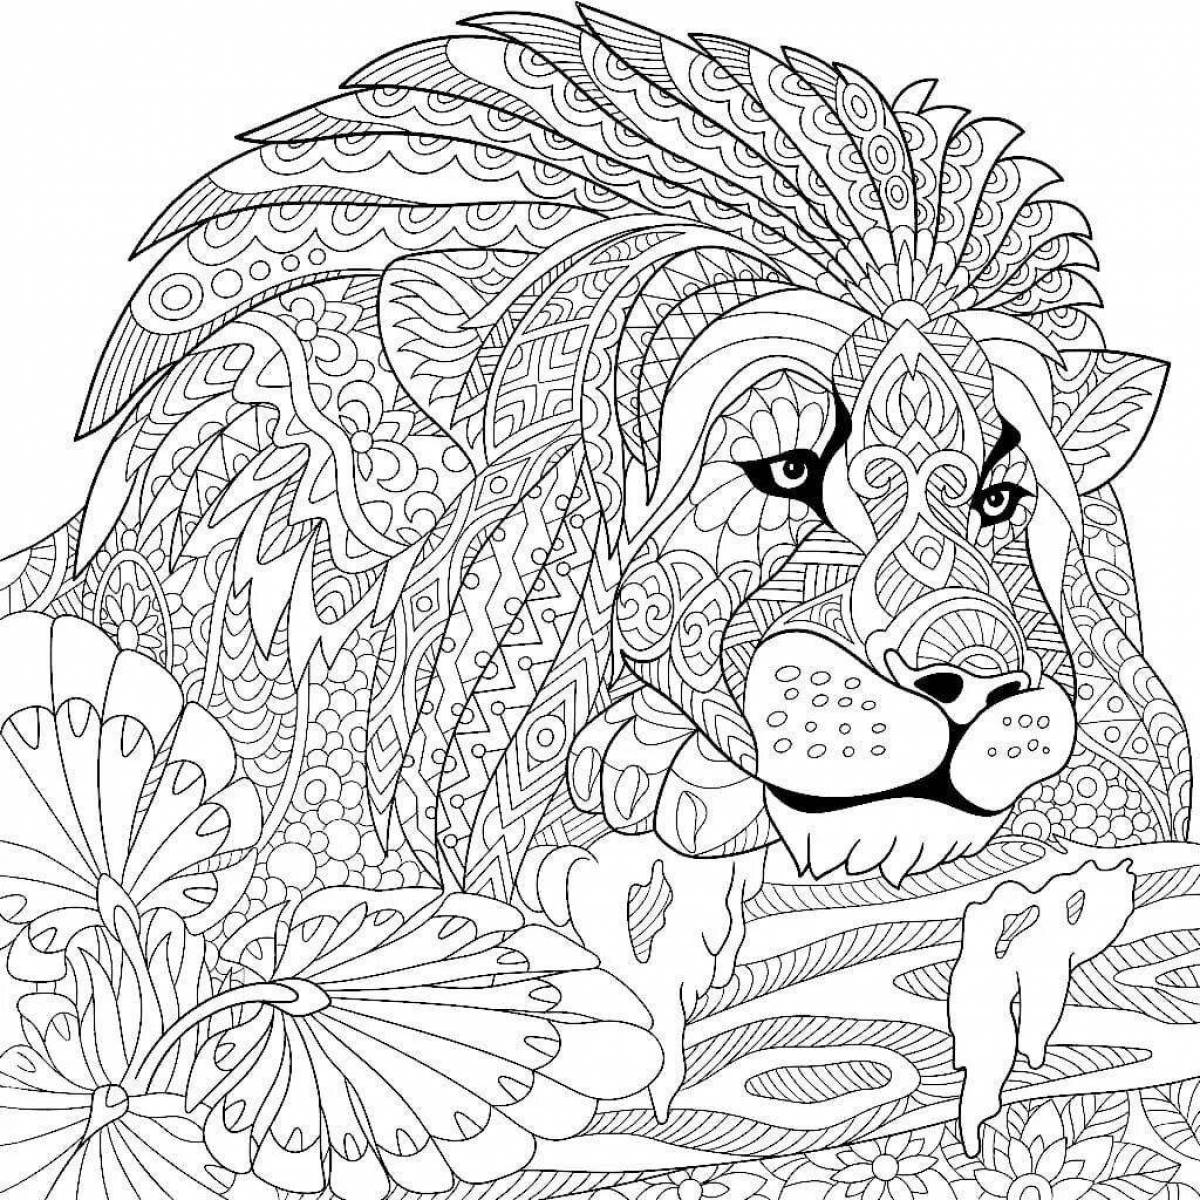 Exciting anti-stress coloring book for markers